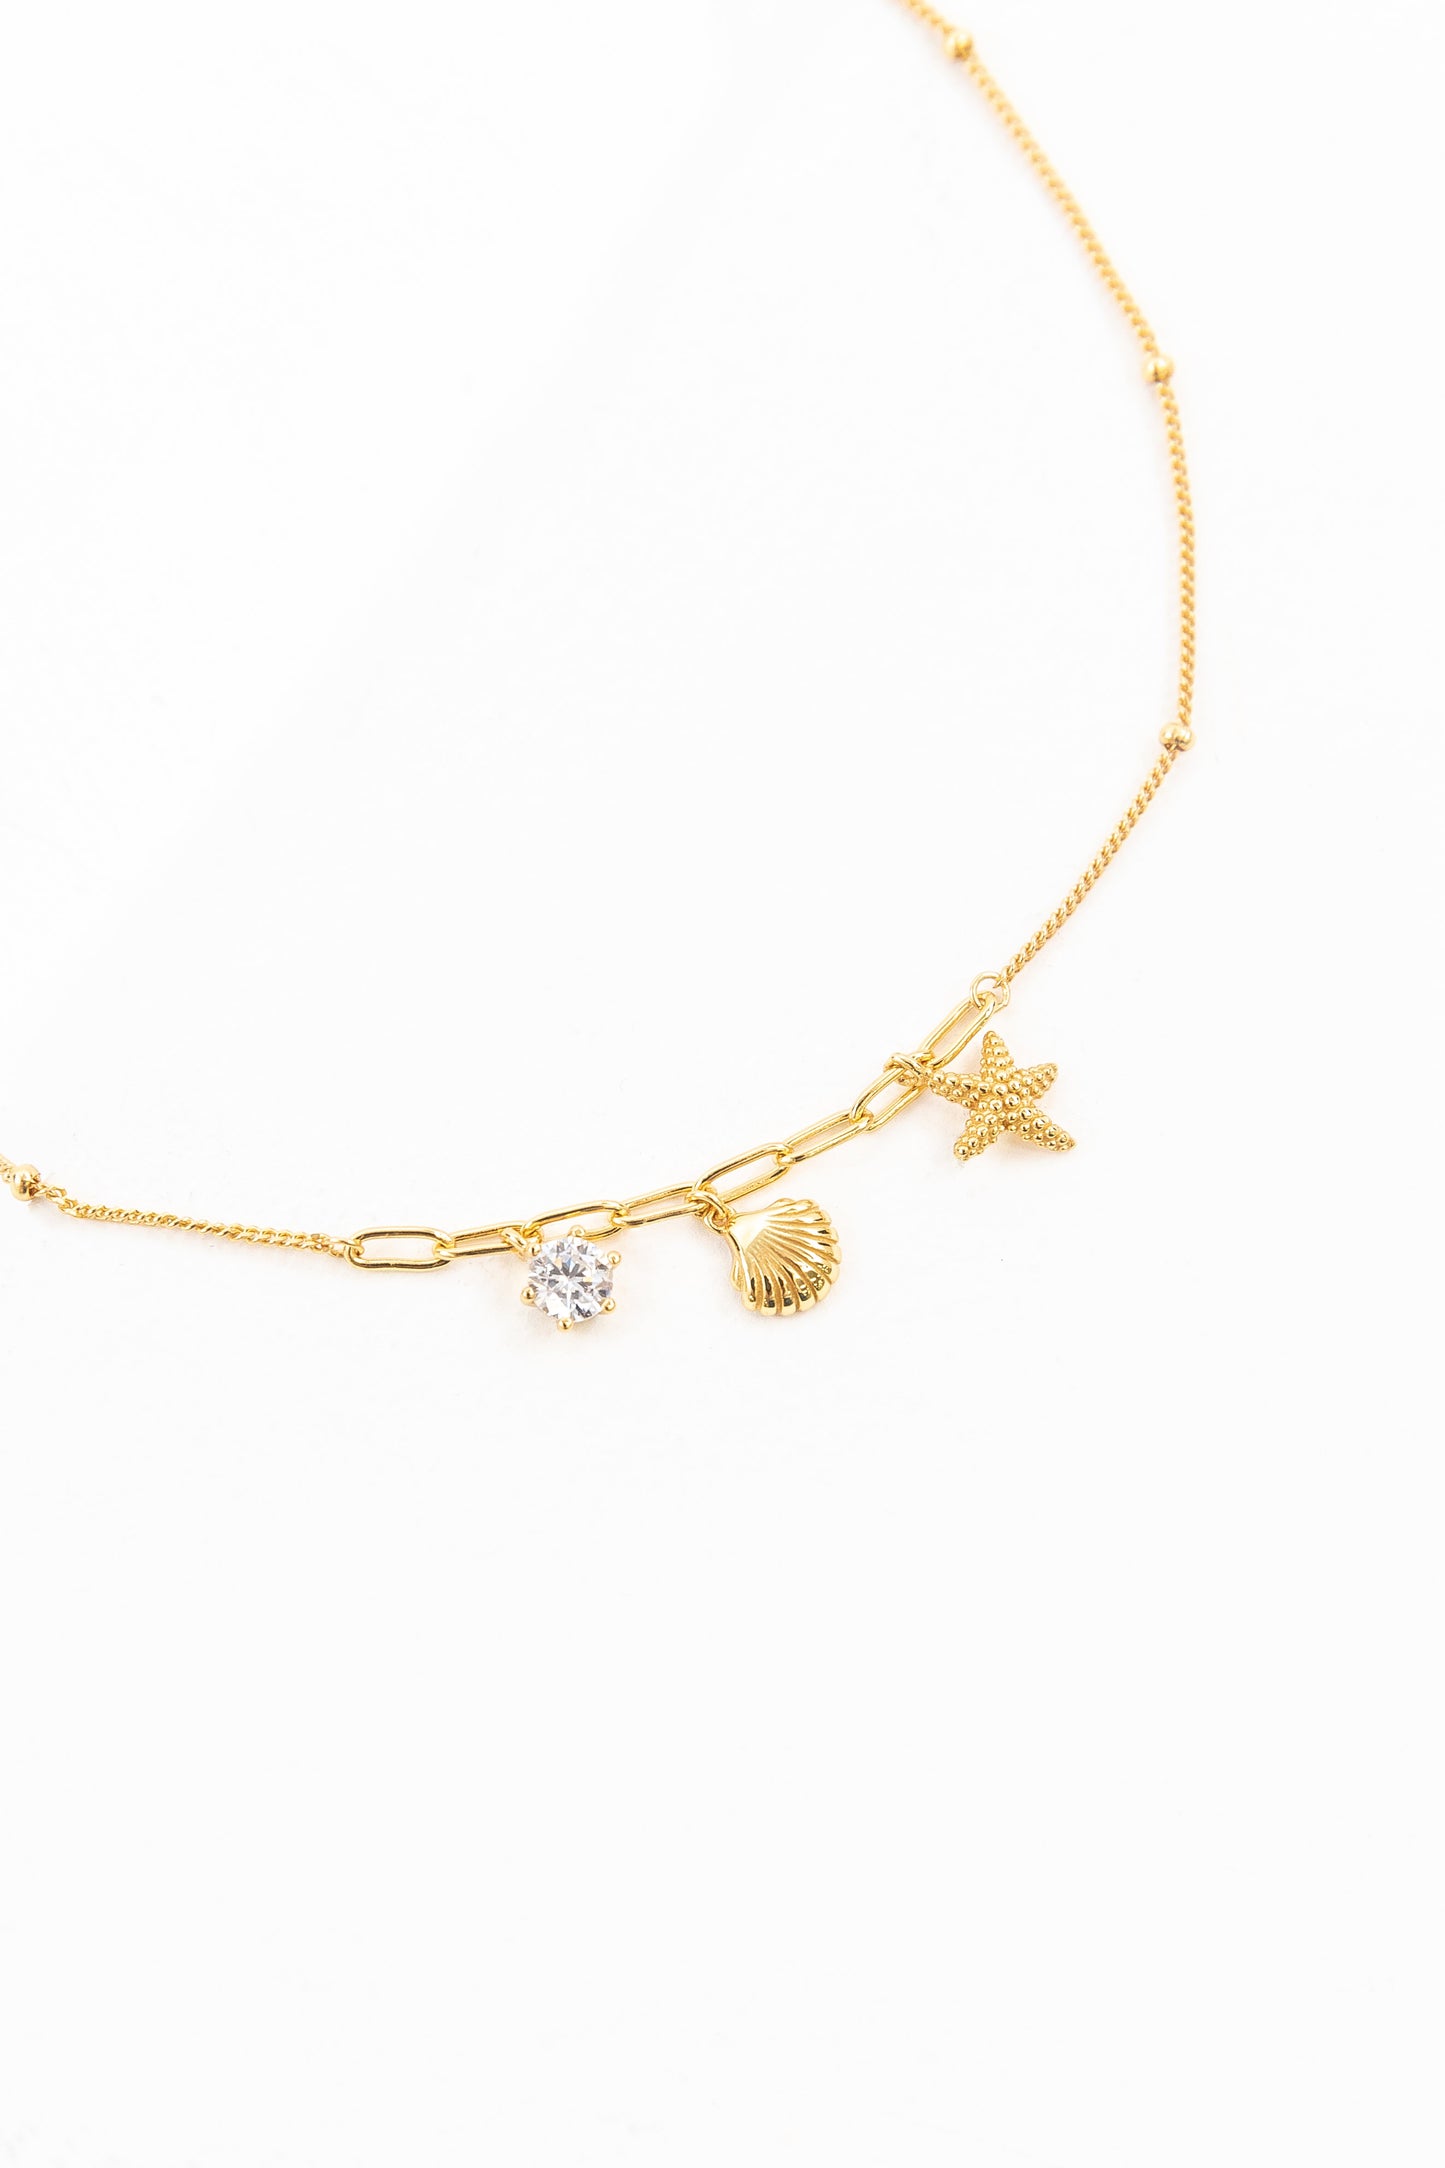 By The Sea Charm Necklace | Gold (14K)